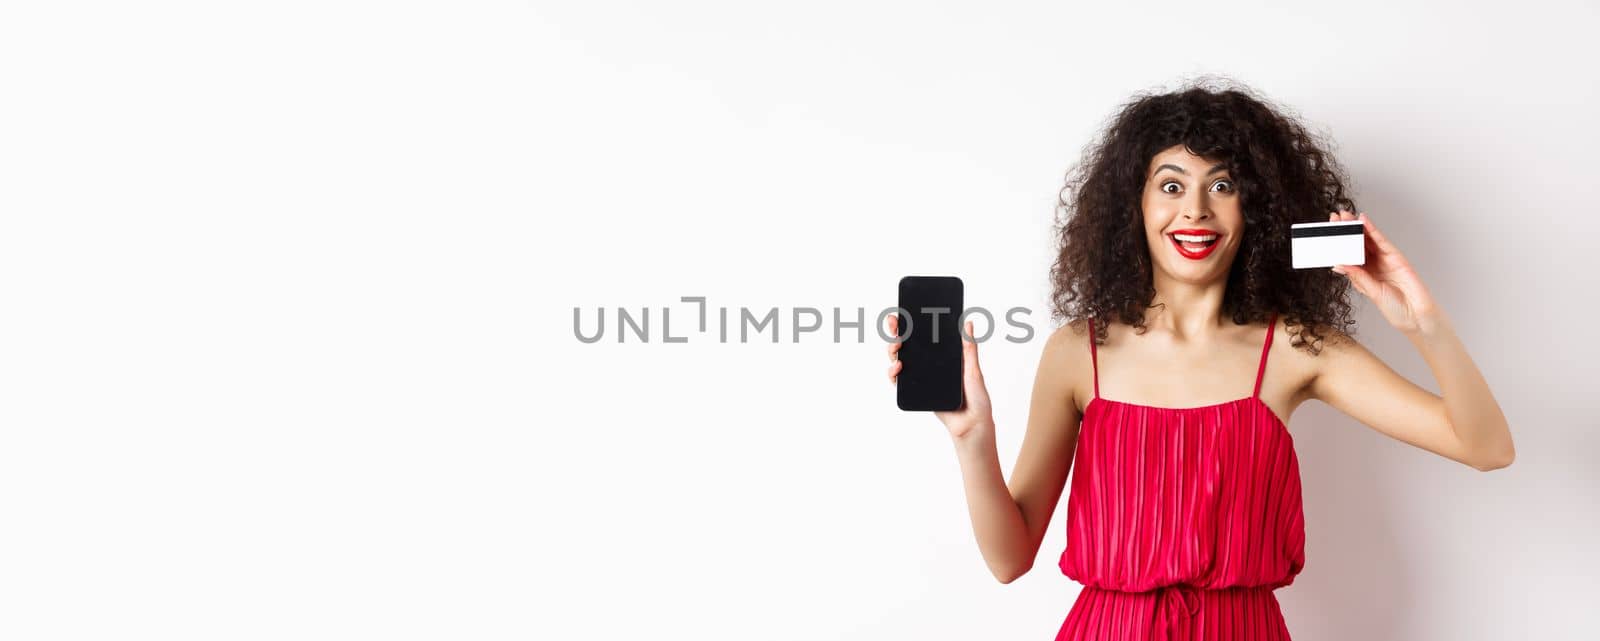 Online shopping concept. Excited curly-haired woman in red dress showing empty smartphone screen and plastic credit card, smiling happy at camera, standing on white background.